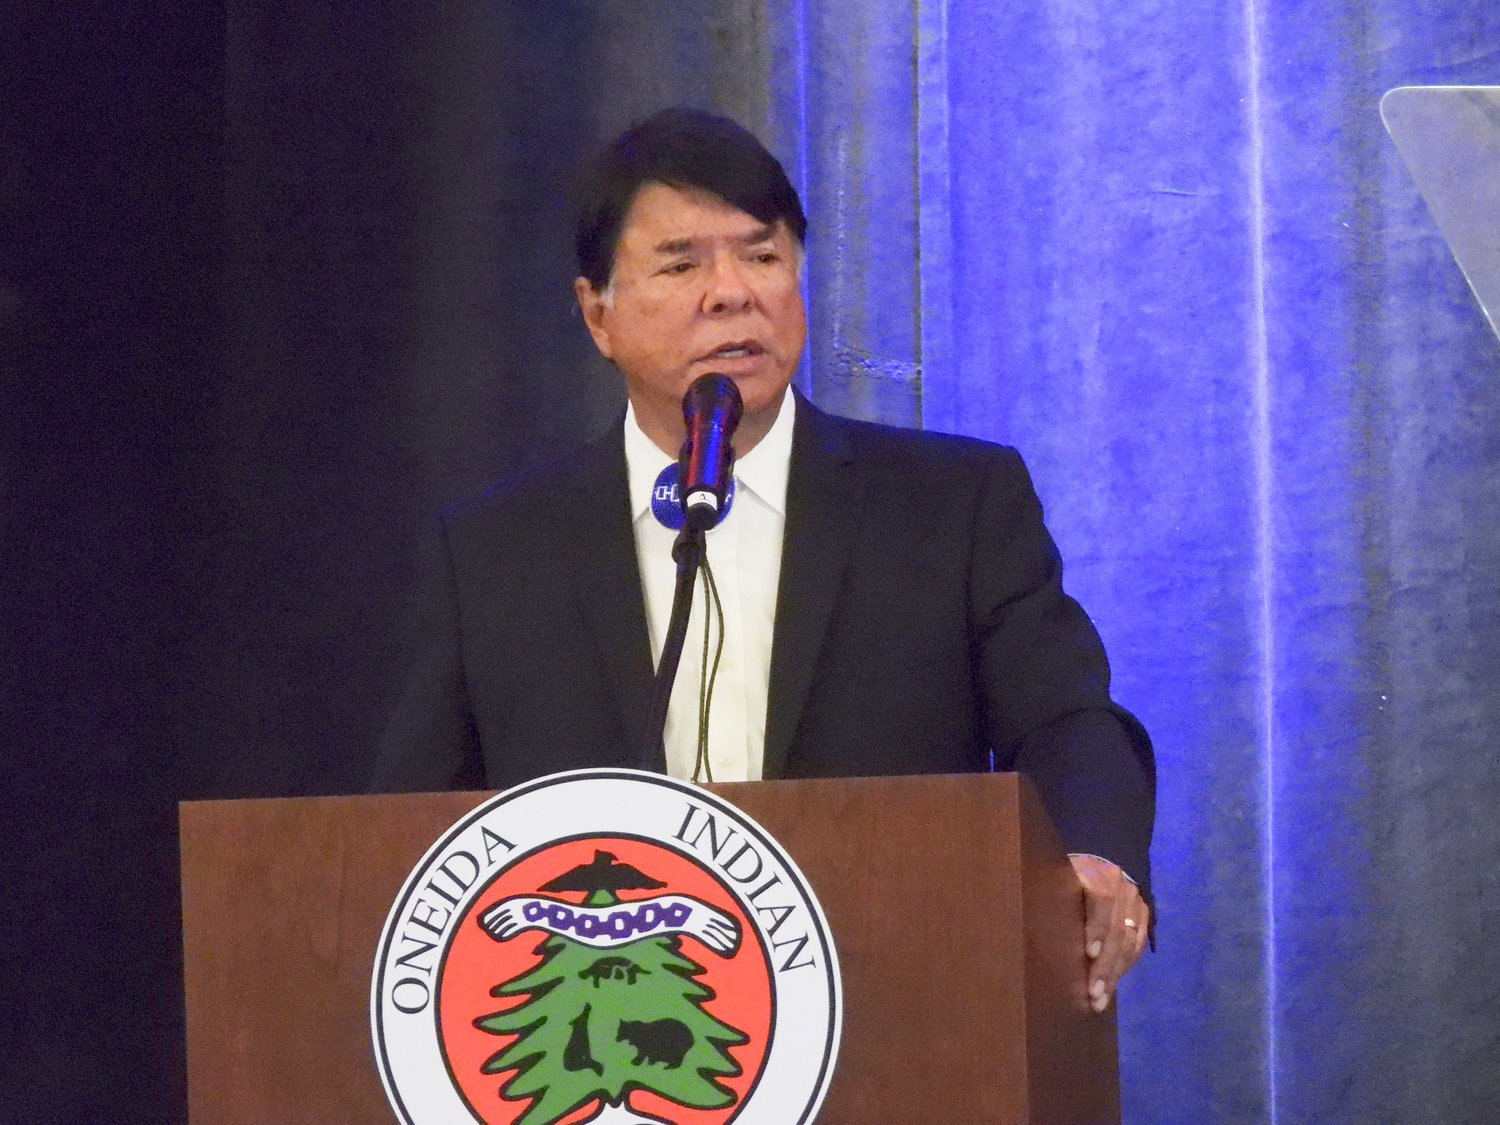 OIN Representative Ray Halbritter speaks at the 21st annual Veterans Recognition Ceremony and Breakfast hosted by the Oneida Indian Nation on Tuesday, Nov. 1